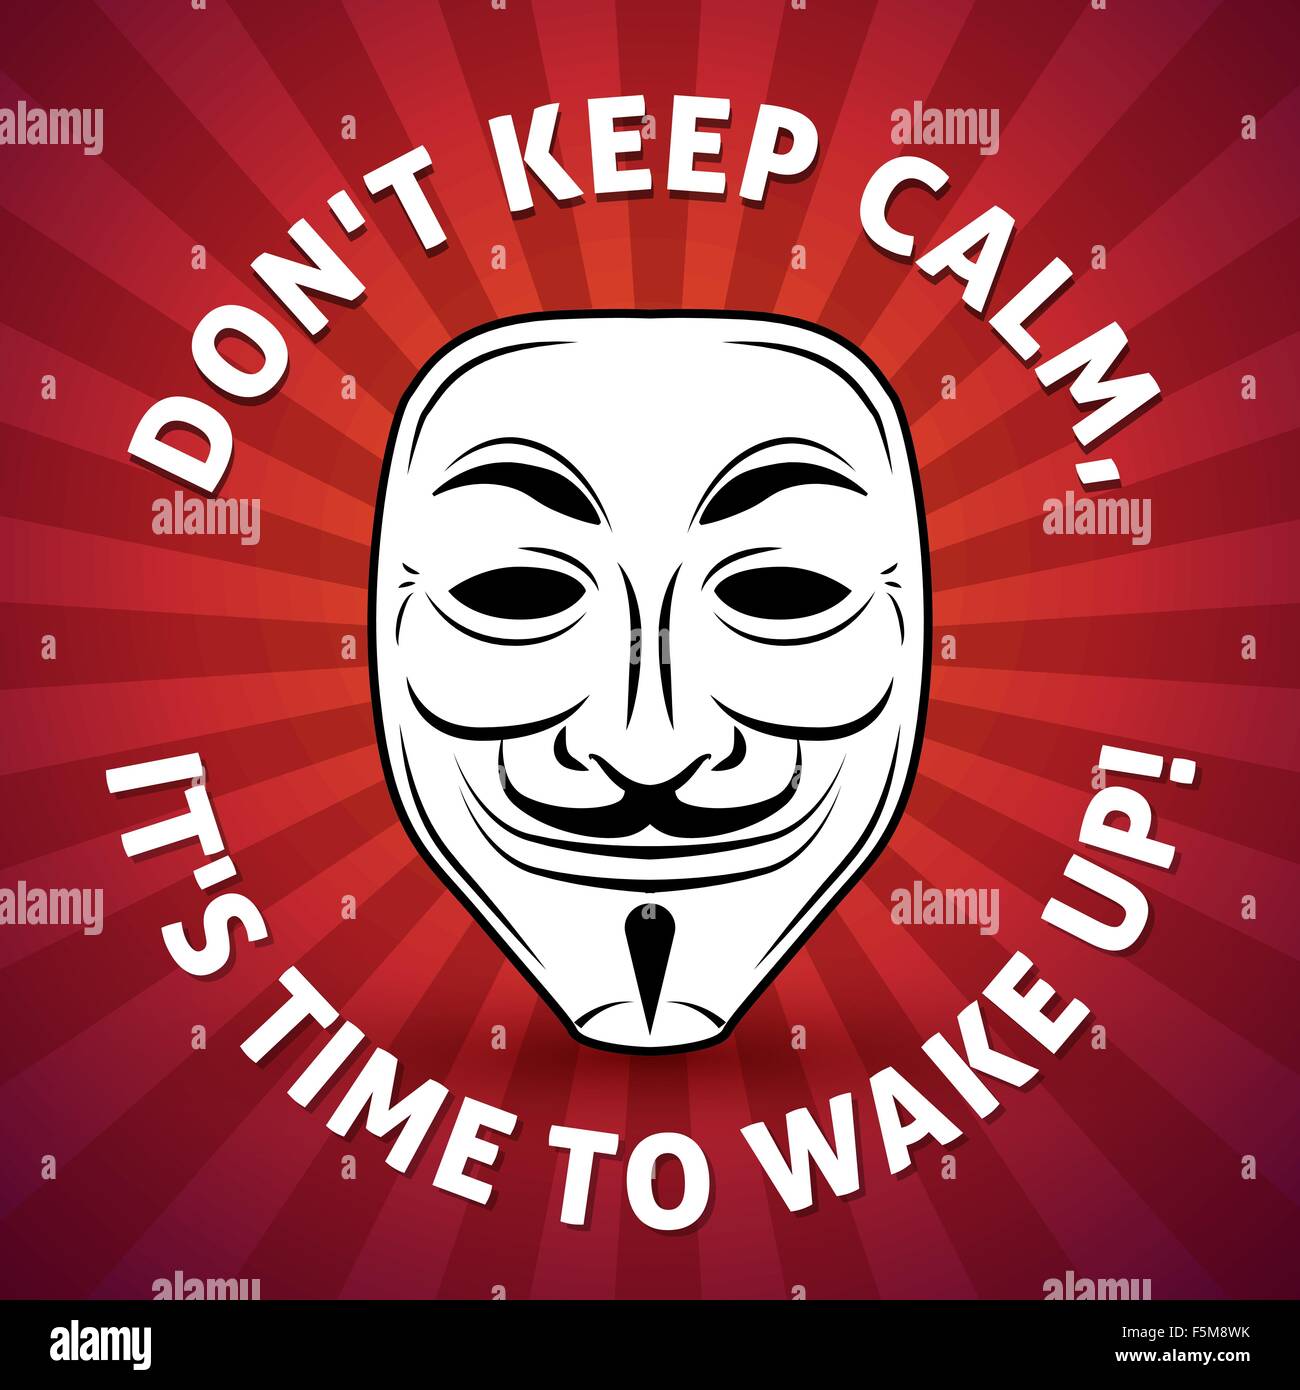 Anonymous mask vector poster illustration. Hacker logo design. Keep Calm design background. Advice motivation picture. Stock Vector